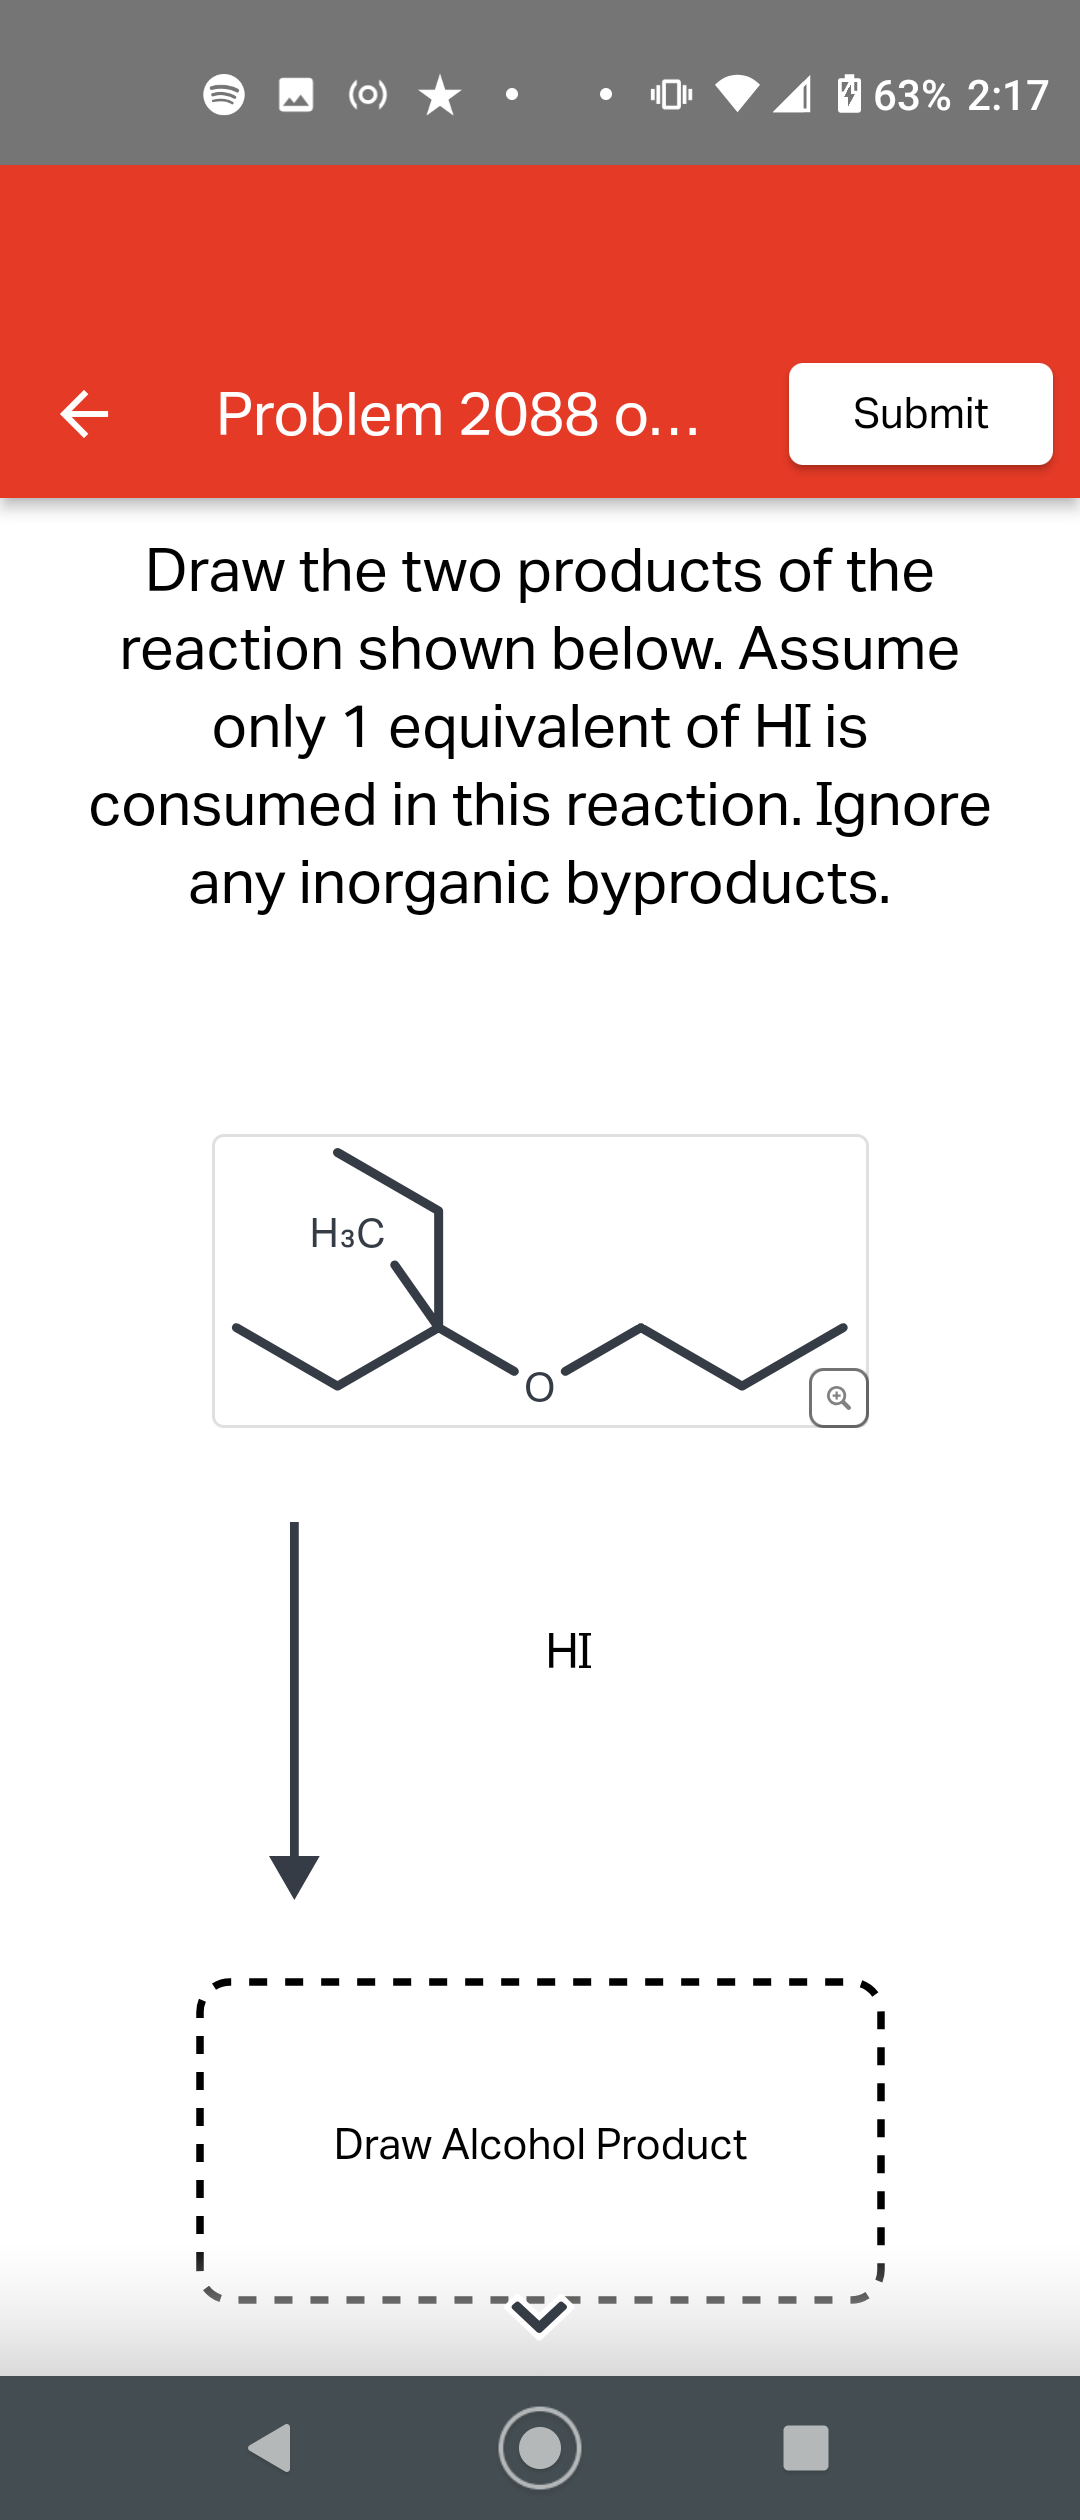 »
(0)
Problem 2088 o...
H3C
Draw the two products of the
reaction shown below. Assume
only 1 equivalent of HI is
consumed in this reaction. Ignore
any inorganic byproducts.
HI
63% 2:17
Draw Alcohol Product
Submit